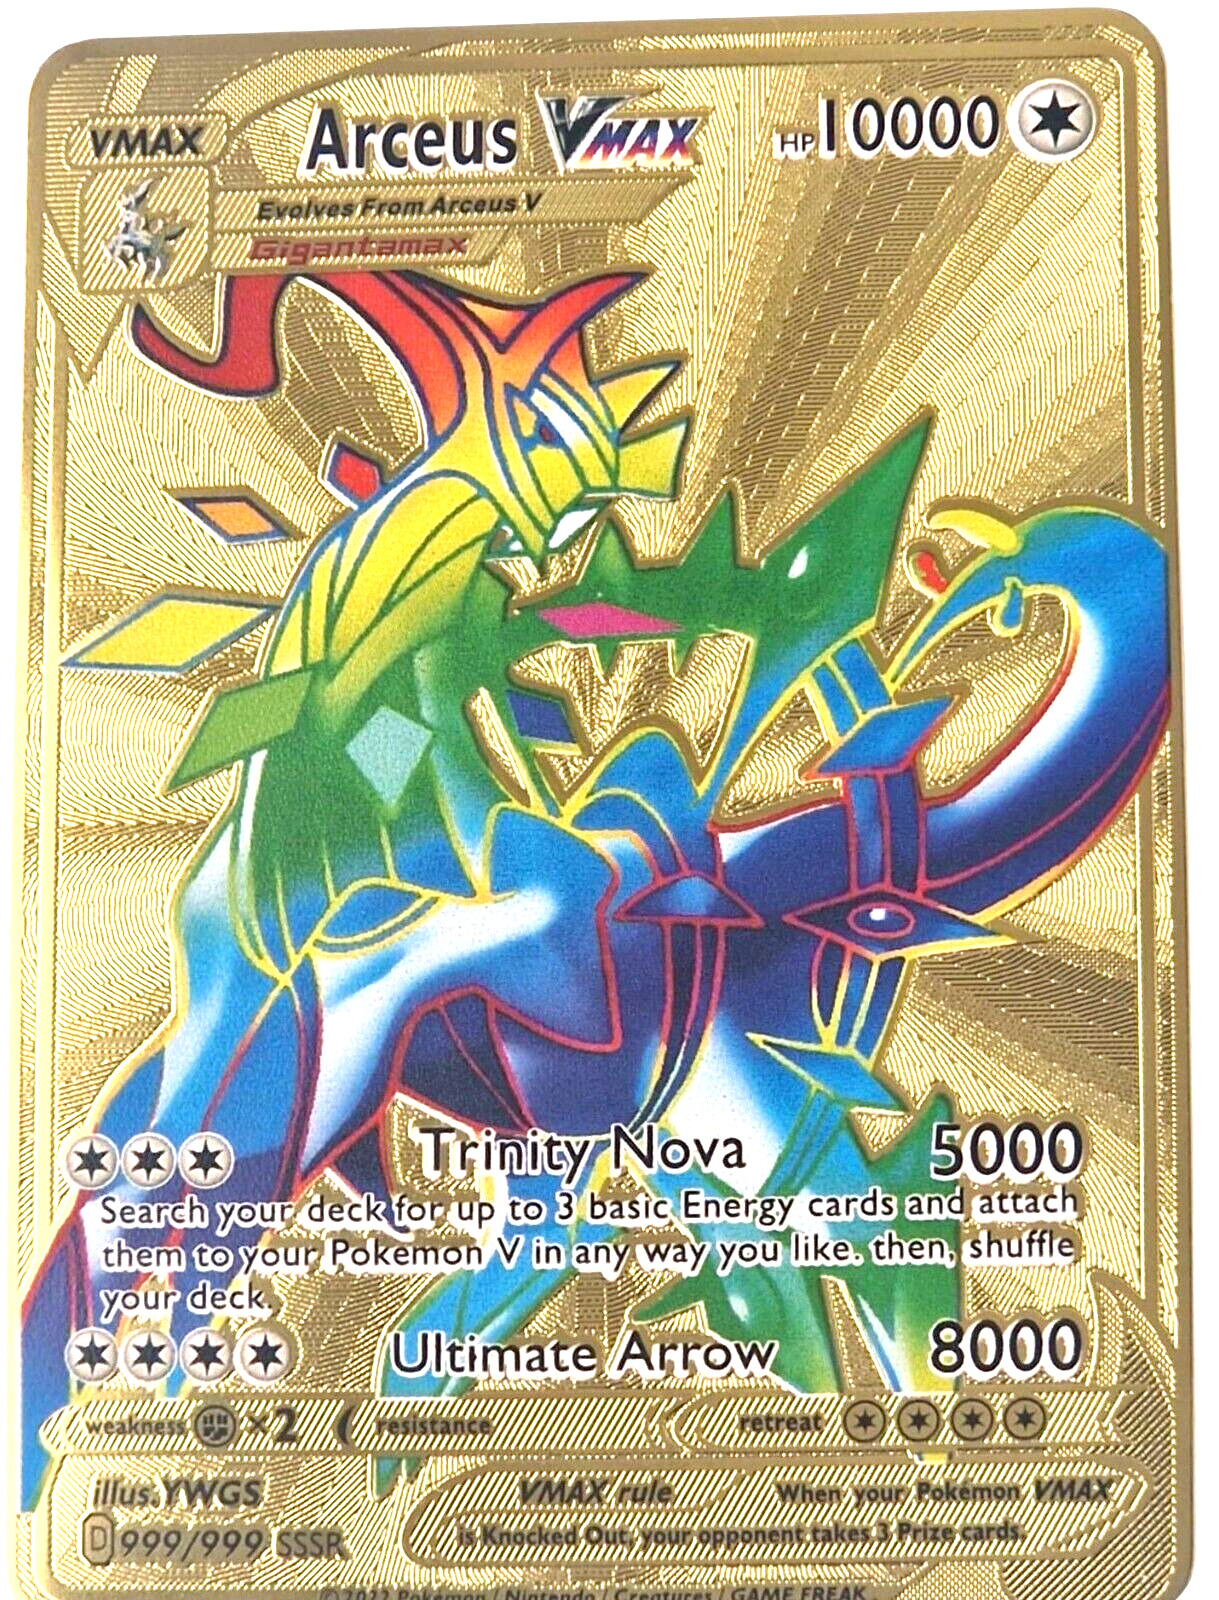 NEW Arceus Vmax Rainbow HP10000 Pokemon Metal Solid Card FunArt Collectable Gift